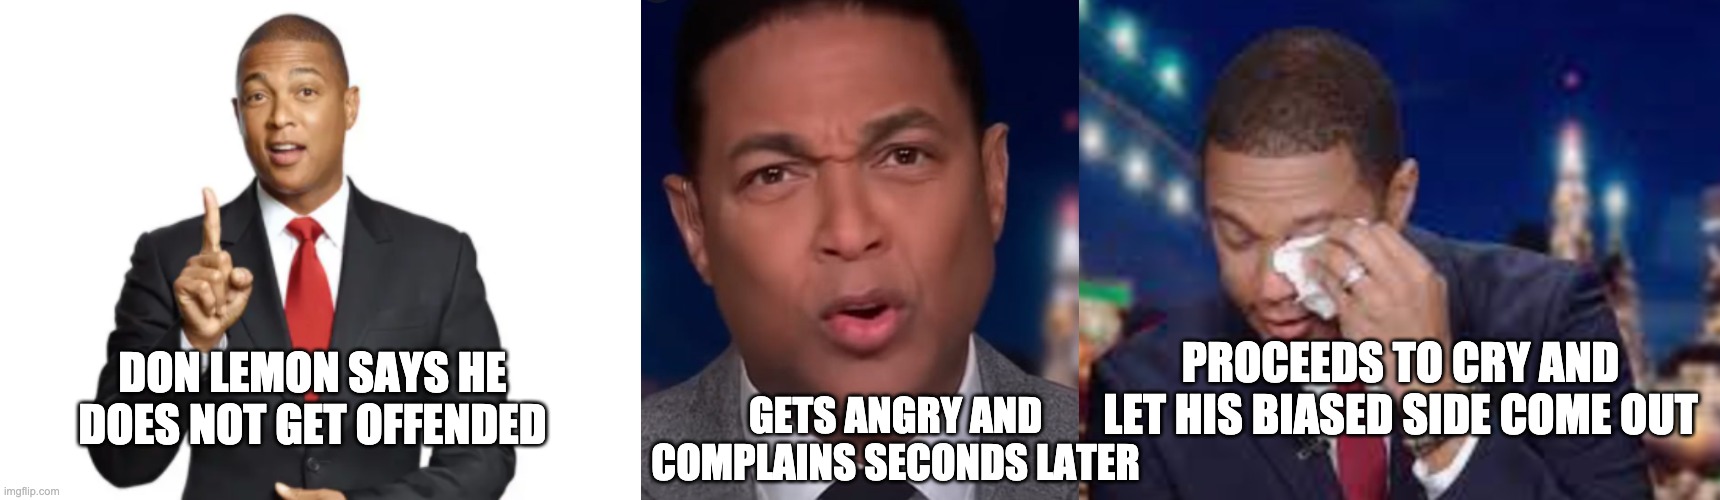 DON LEMON says he does not get offended then this happens... | GETS ANGRY AND COMPLAINS SECONDS LATER; PROCEEDS TO CRY AND LET HIS BIASED SIDE COME OUT; DON LEMON SAYS HE DOES NOT GET OFFENDED | image tagged in don lemon,cnn,democrats,republicans,crying,memes | made w/ Imgflip meme maker